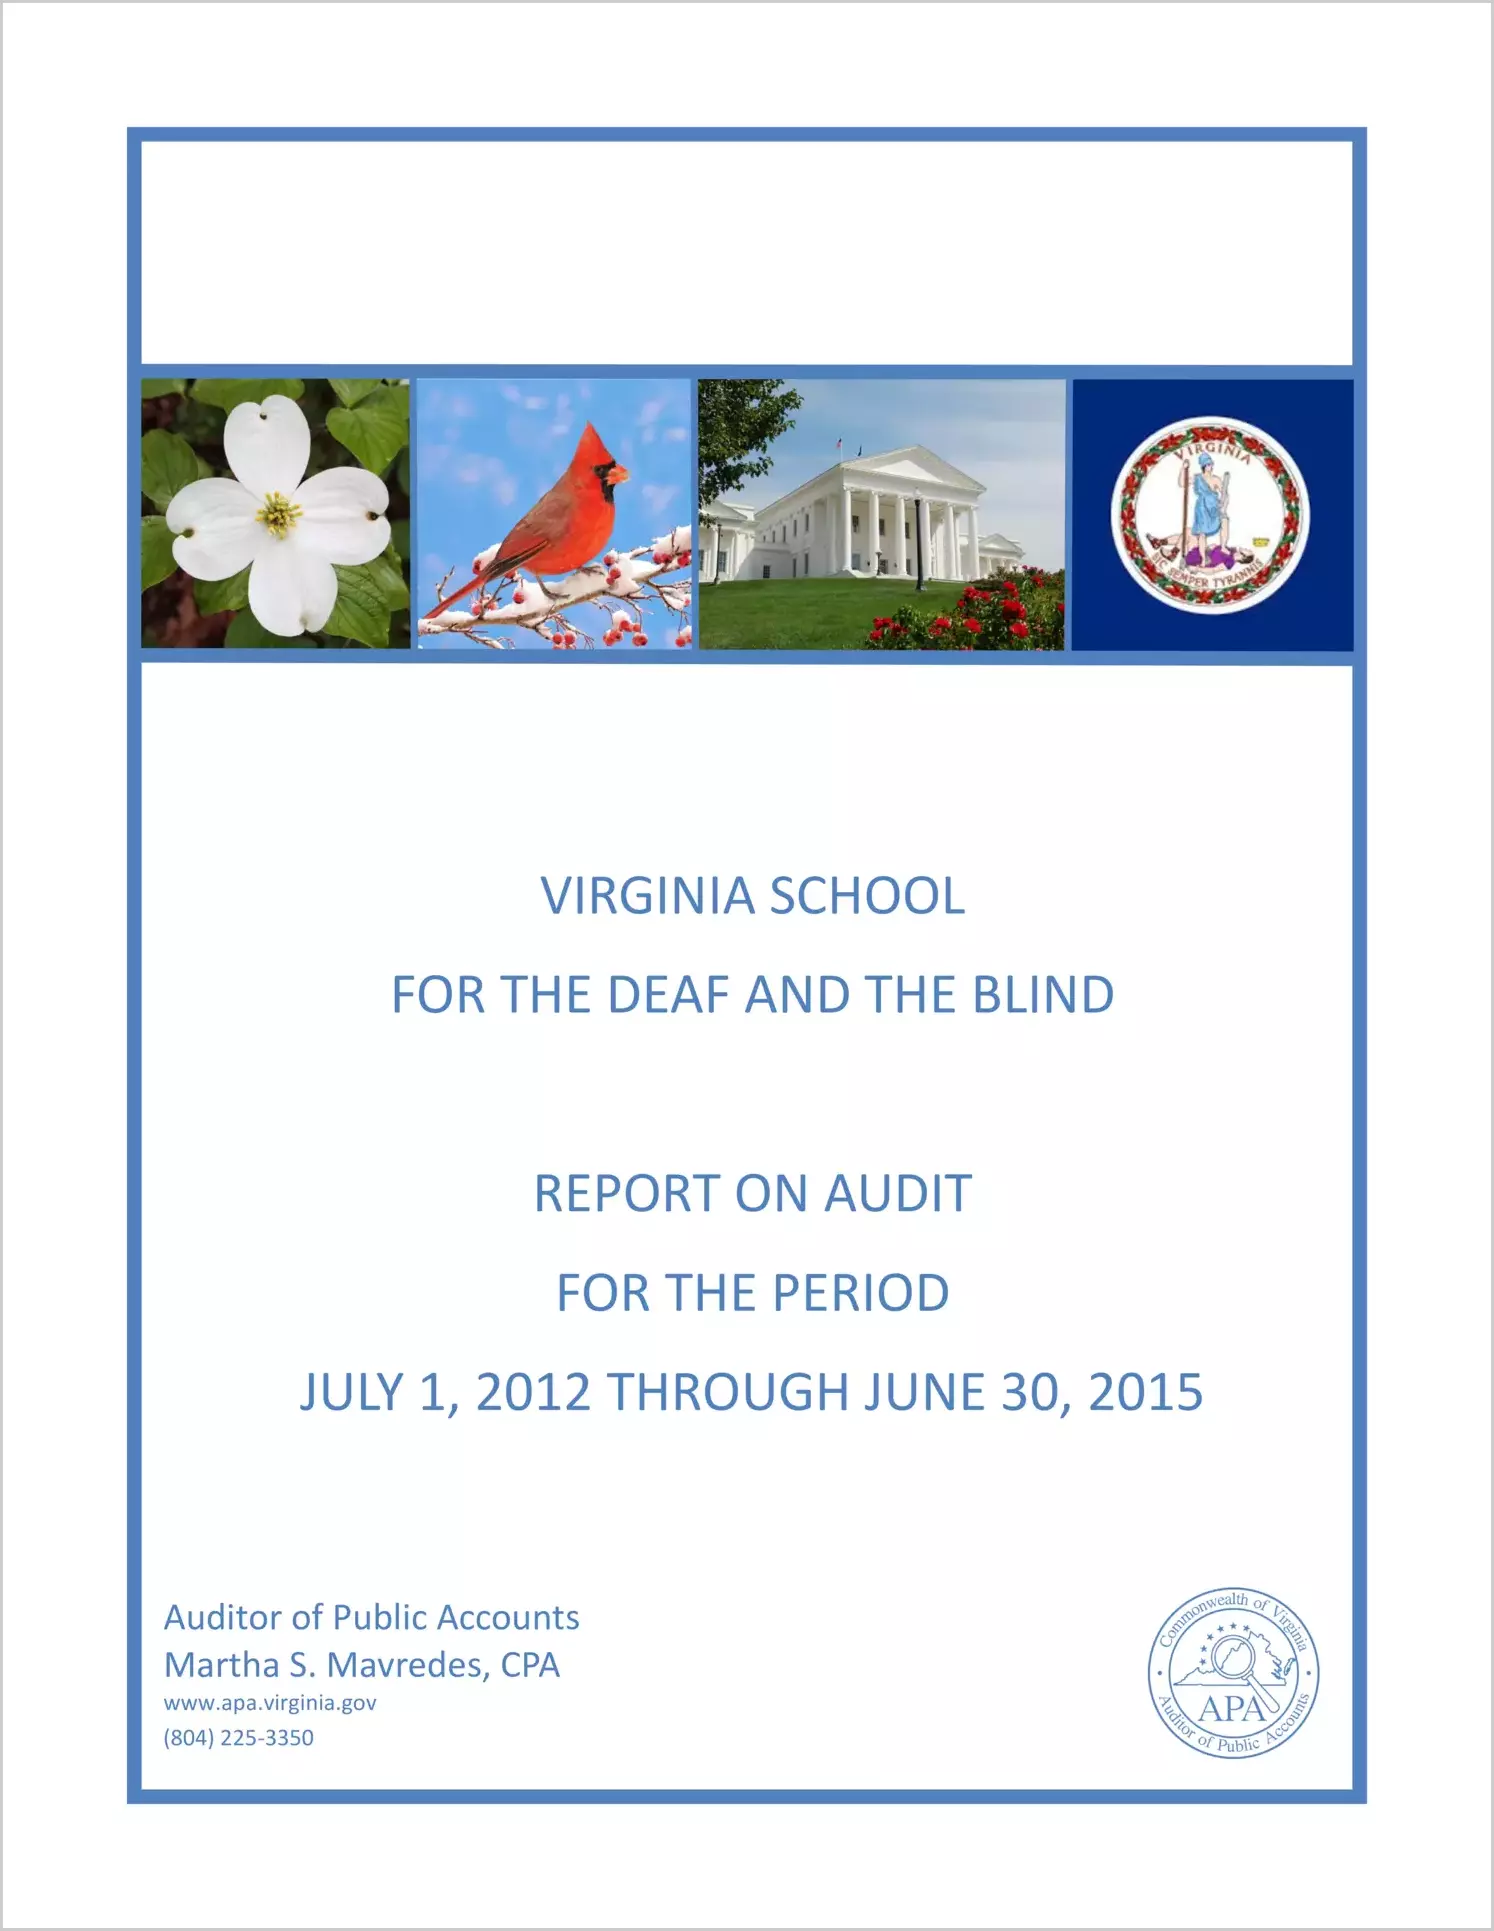 Virginia School for the Deaf and the Blind - for the period July 1, 2012 through June 30, 2015